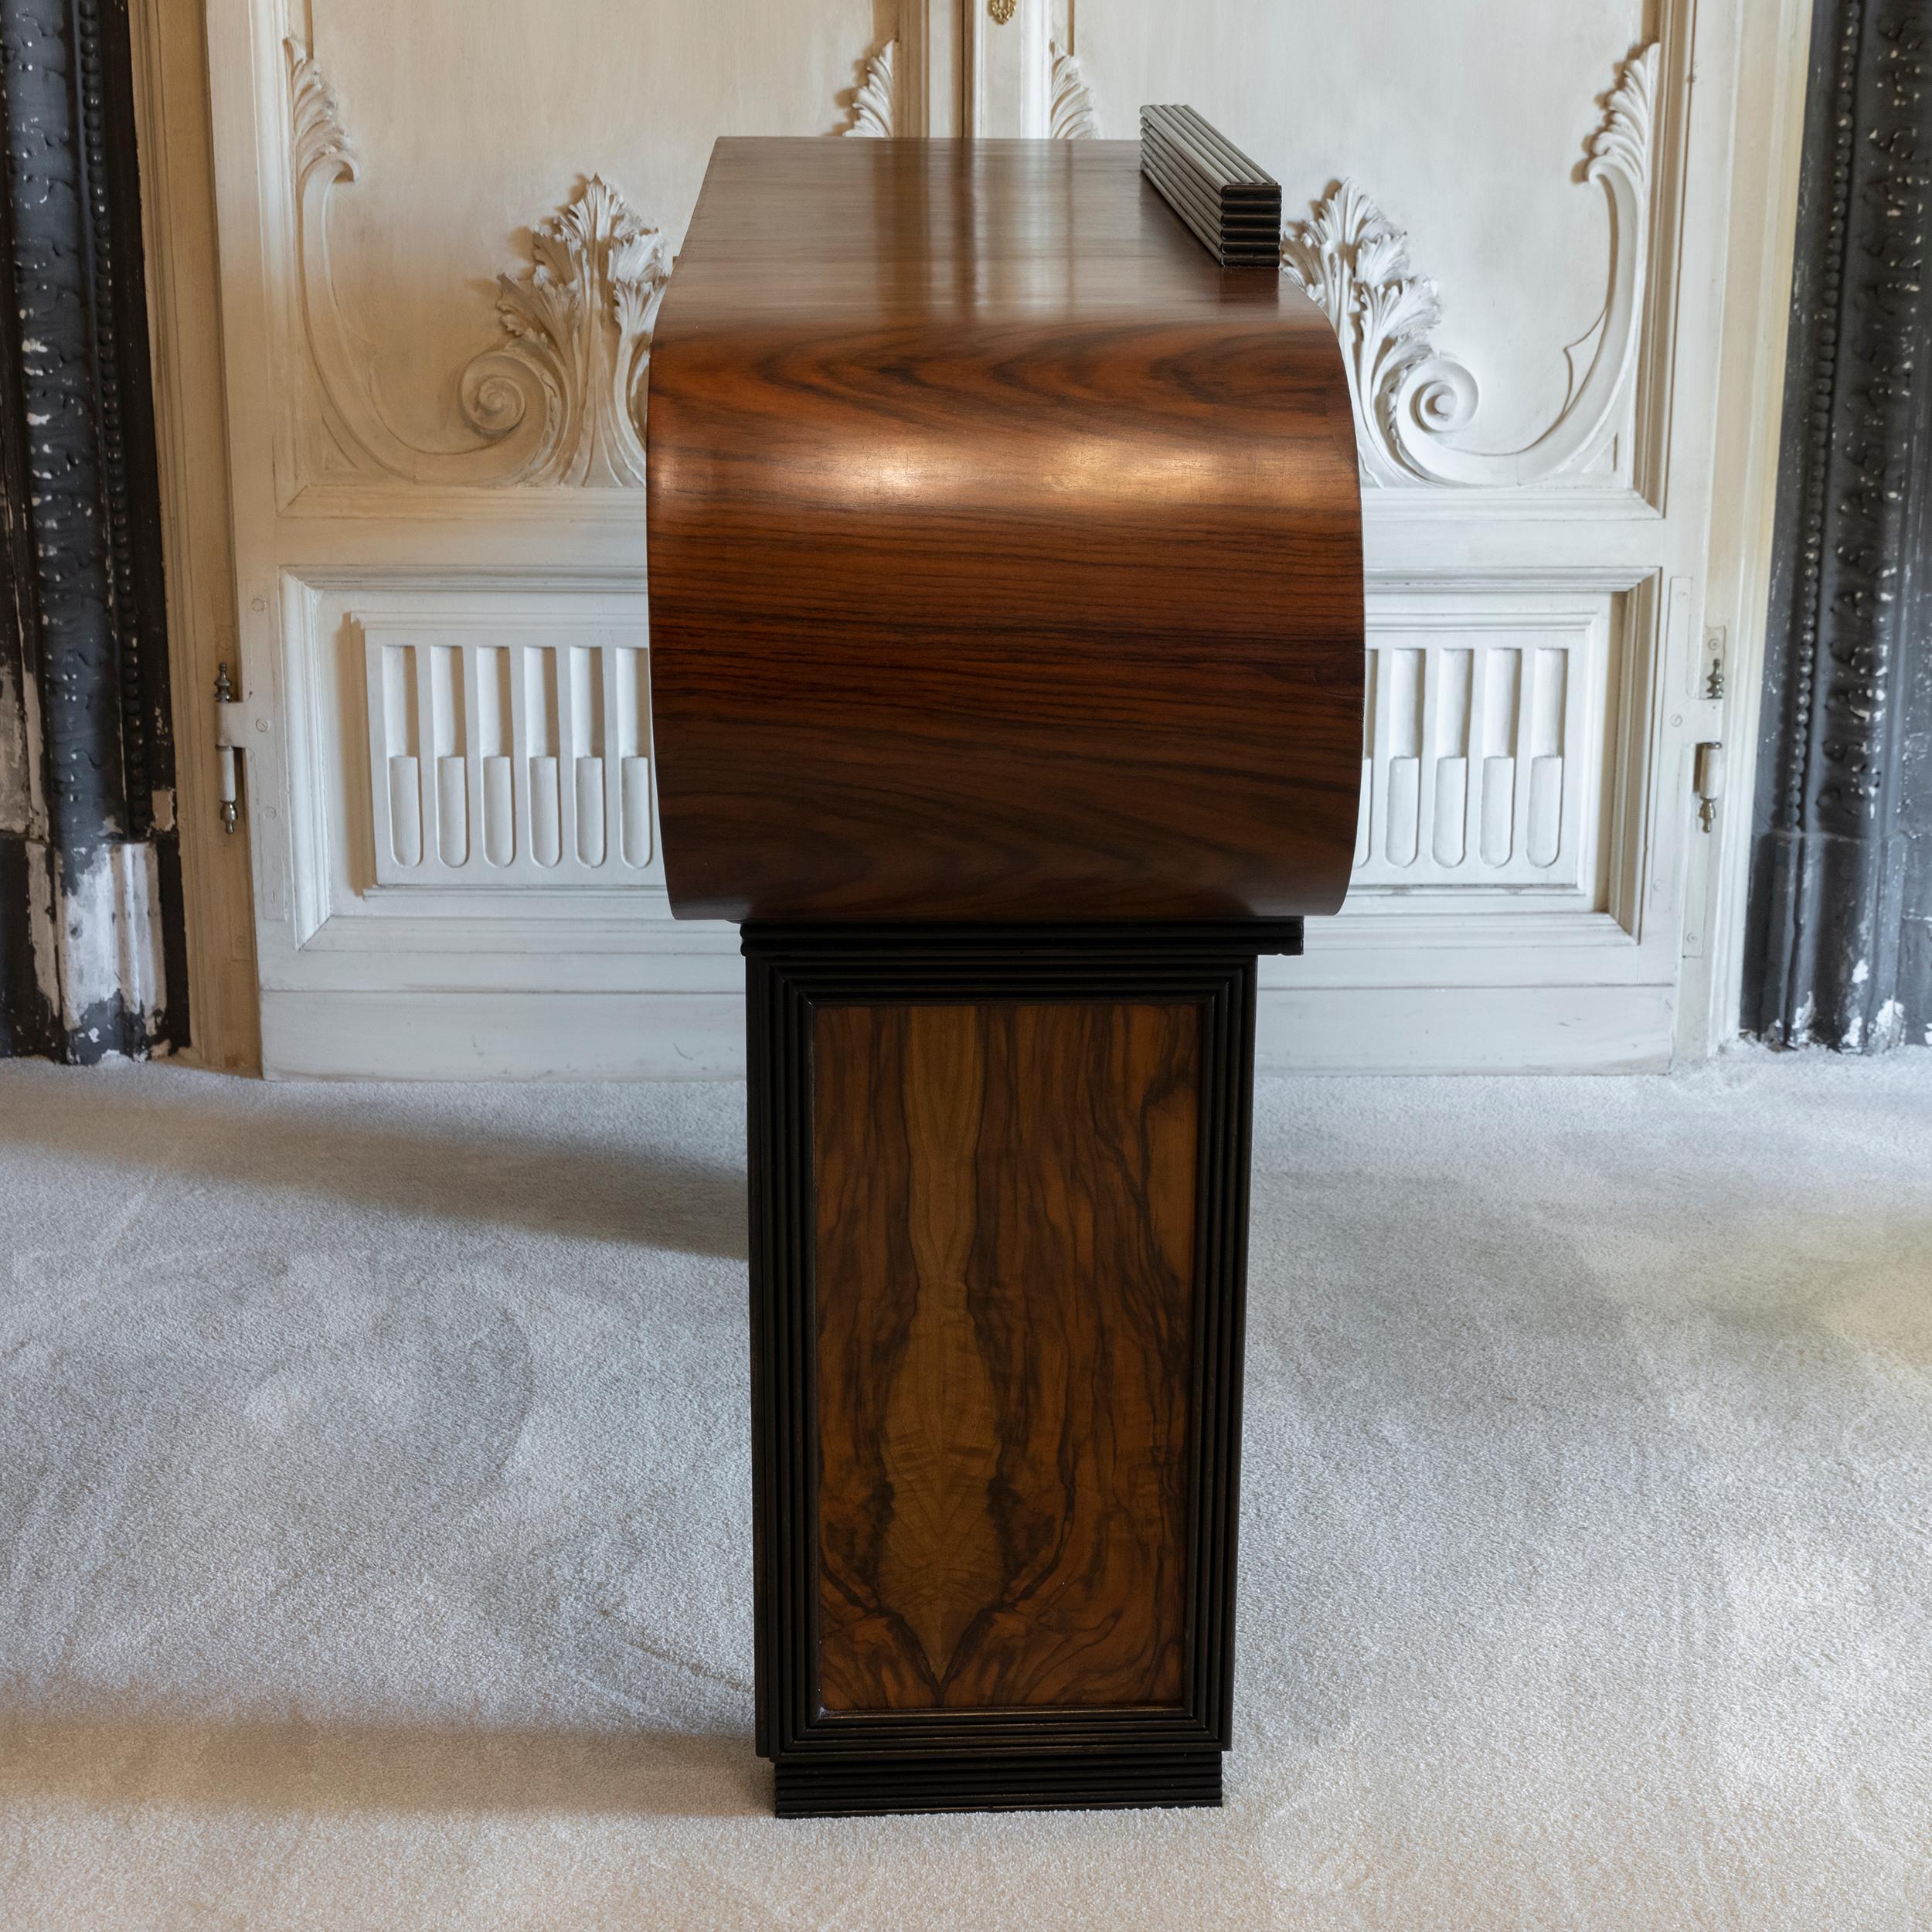 1930s Italian Deco Console Table with Drawers Palisander, Mahogany and Walnut For Sale 3